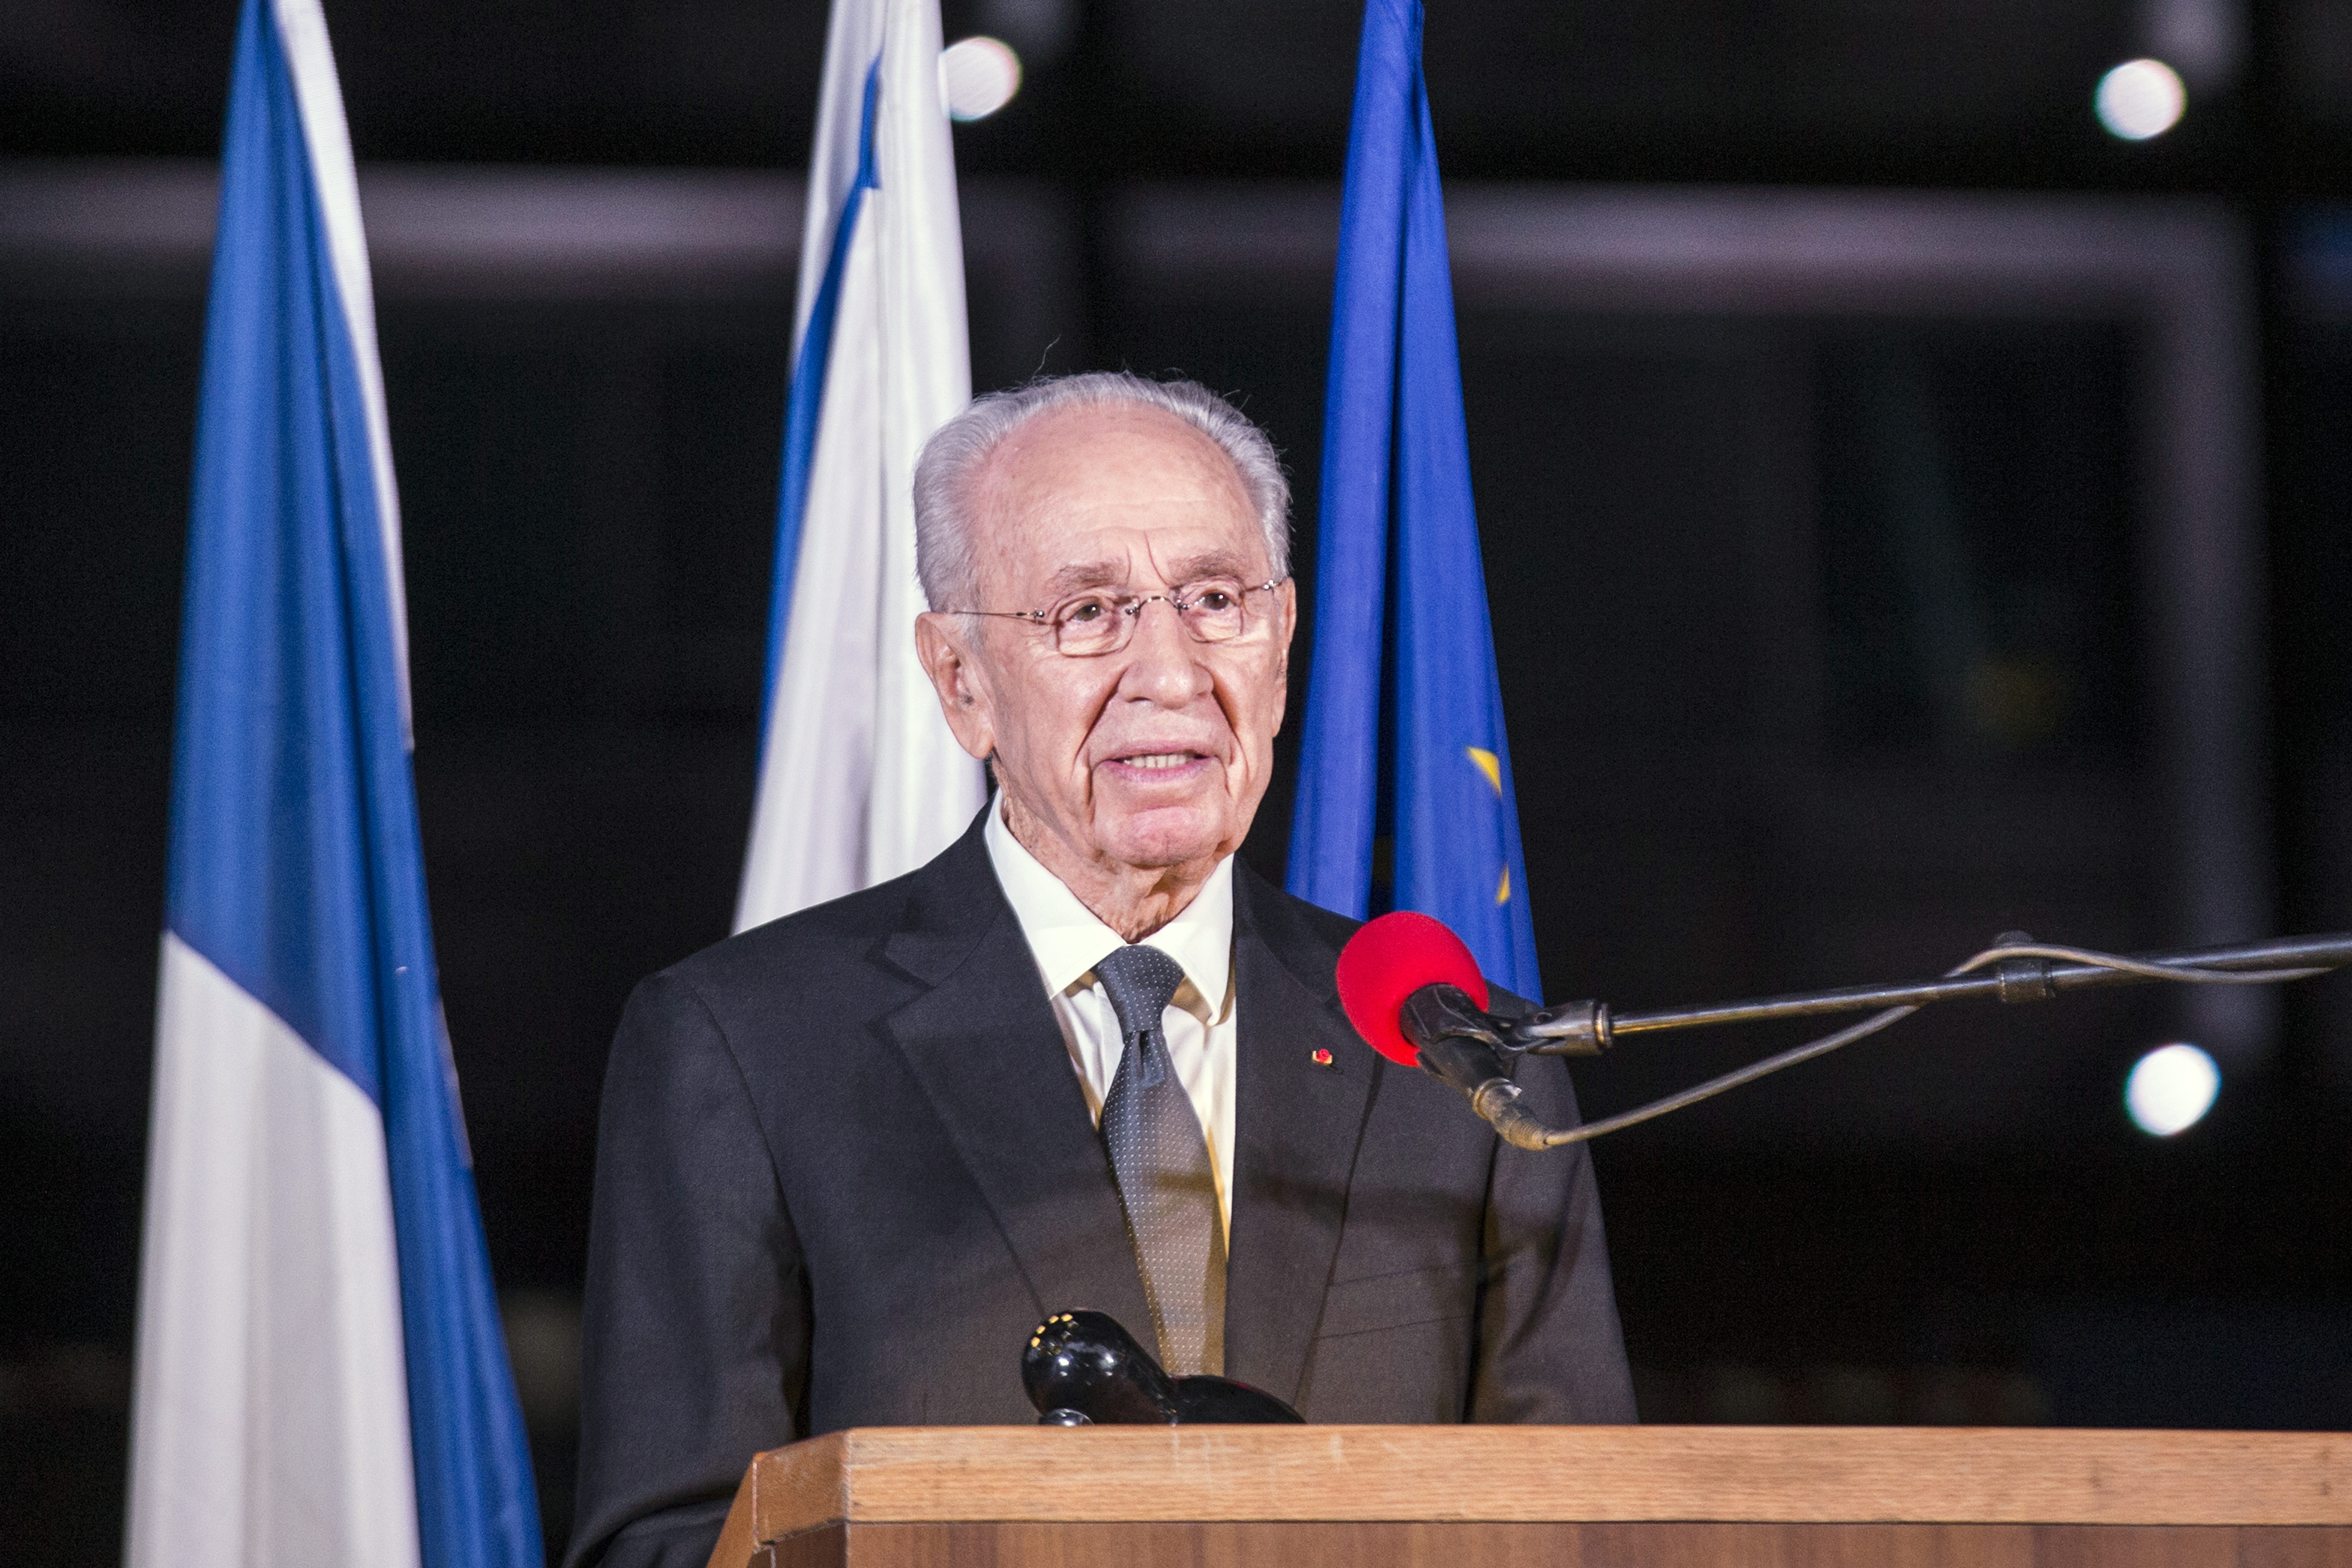 (FILES) This file photo taken on November 14, 2015 shows former Israeli President Shimon Peres delivering a speech in honor of the victims of the Paris attacks in Rabin Square in the Israeli coastal city of Tel Aviv.  Israeli ex-president and Nobel peace laureate Shimon Peres suffered a stroke on September 13, 2016 and was hospitalised, his office said of the 93-year-old. "The ex-president was hospitalised at Tel HaShomer Hospital after a stroke," his office said in a statement. "He is conscious and is receiving appropriate treatment."  / AFP PHOTO / JACK GUEZ